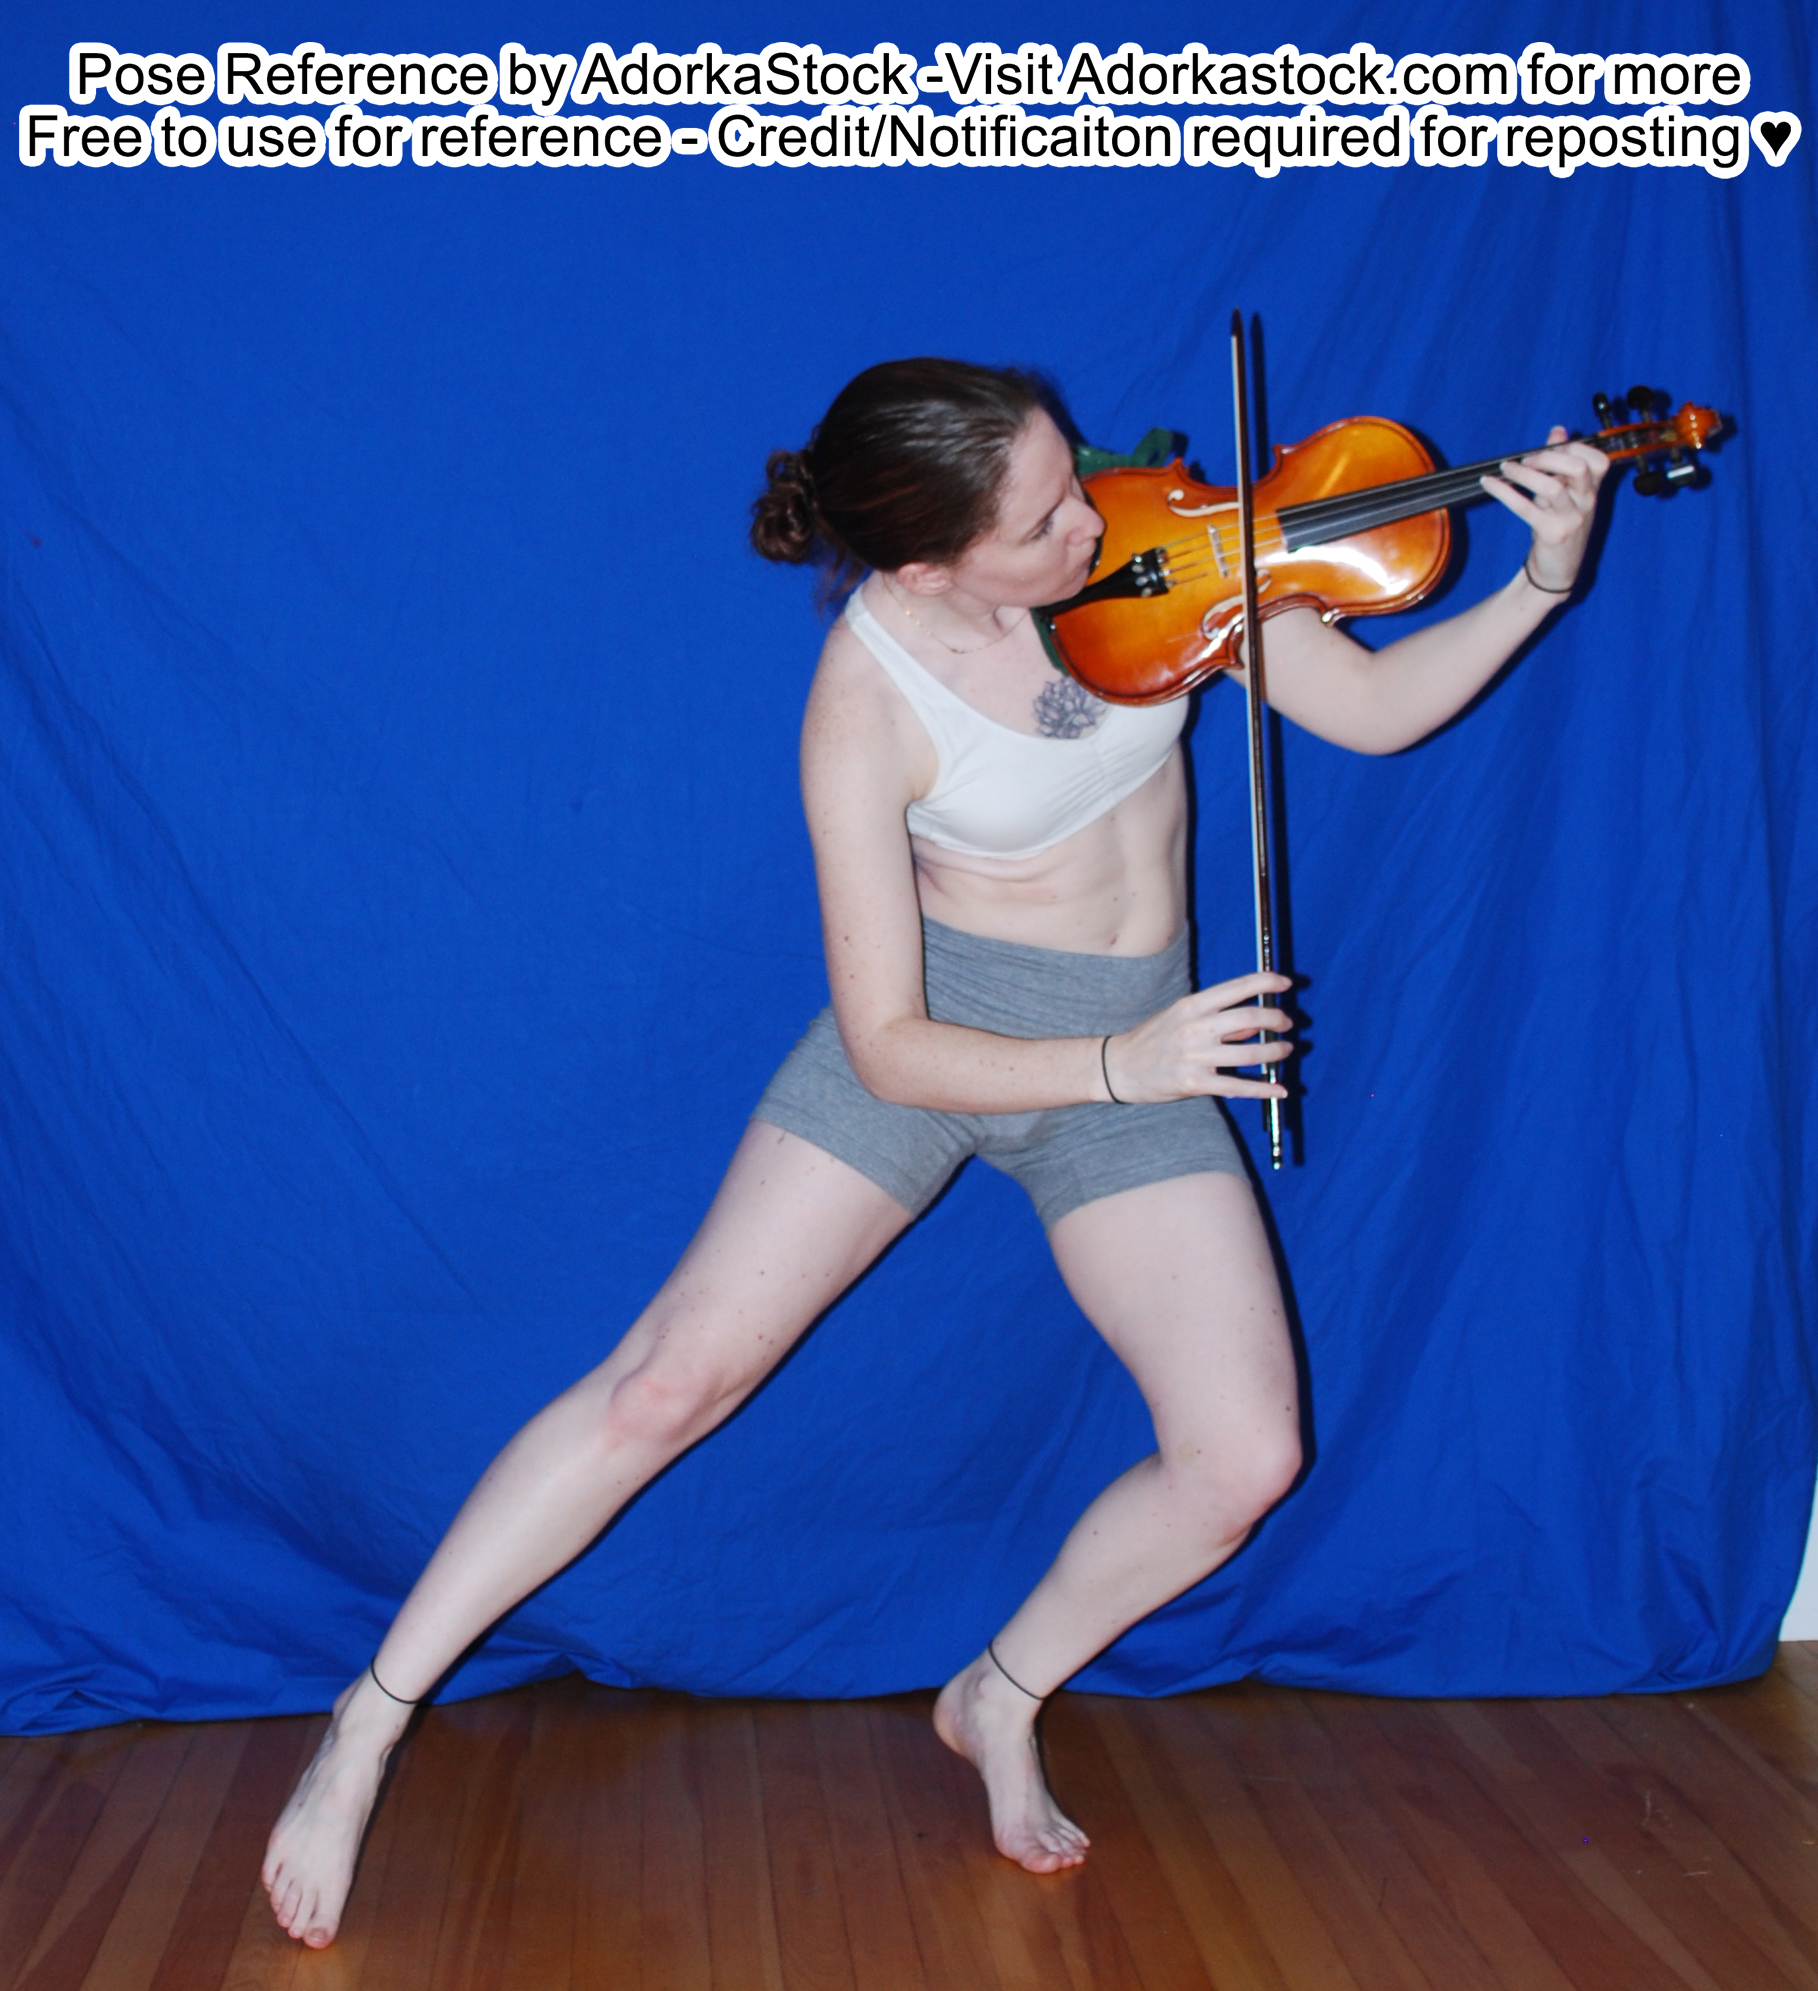 Thin, white, female pose reference model in lunge pose with a viola.